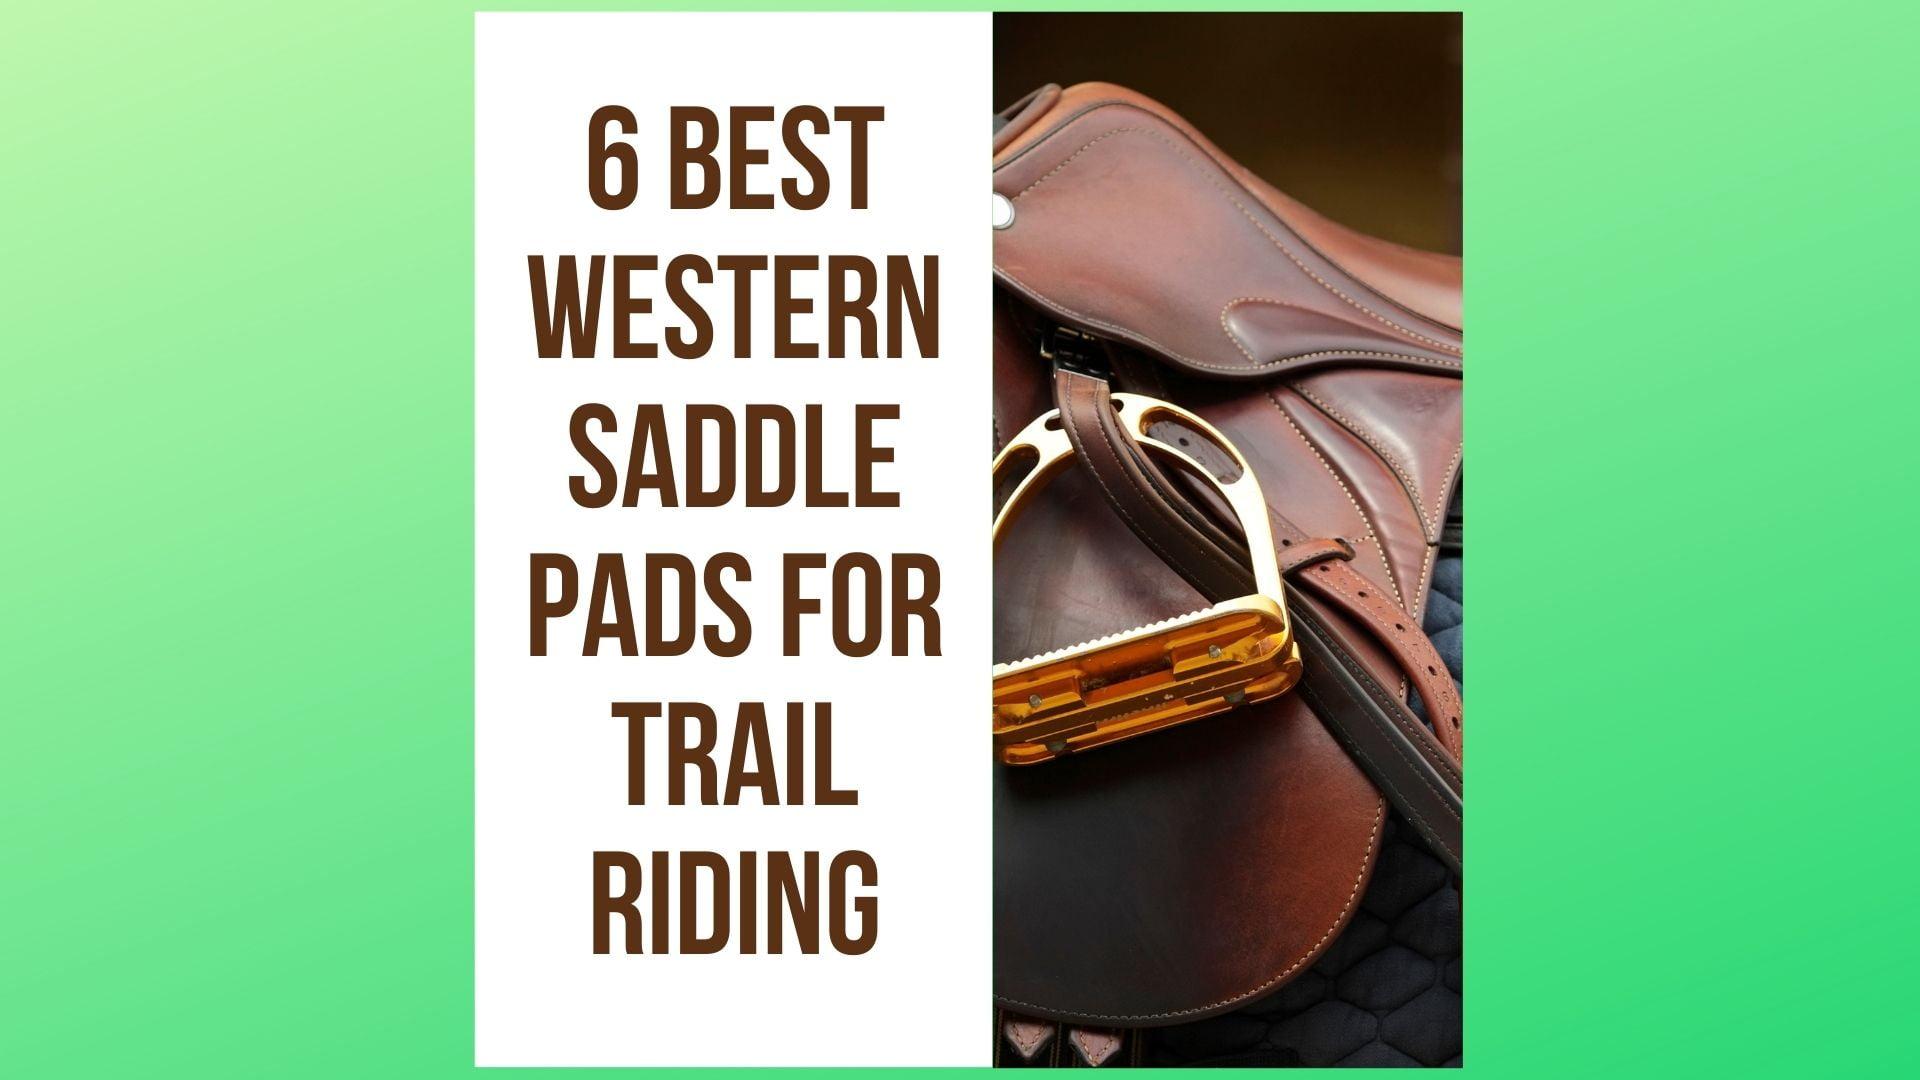 6 Best Western Saddle Pads for Trail Riding